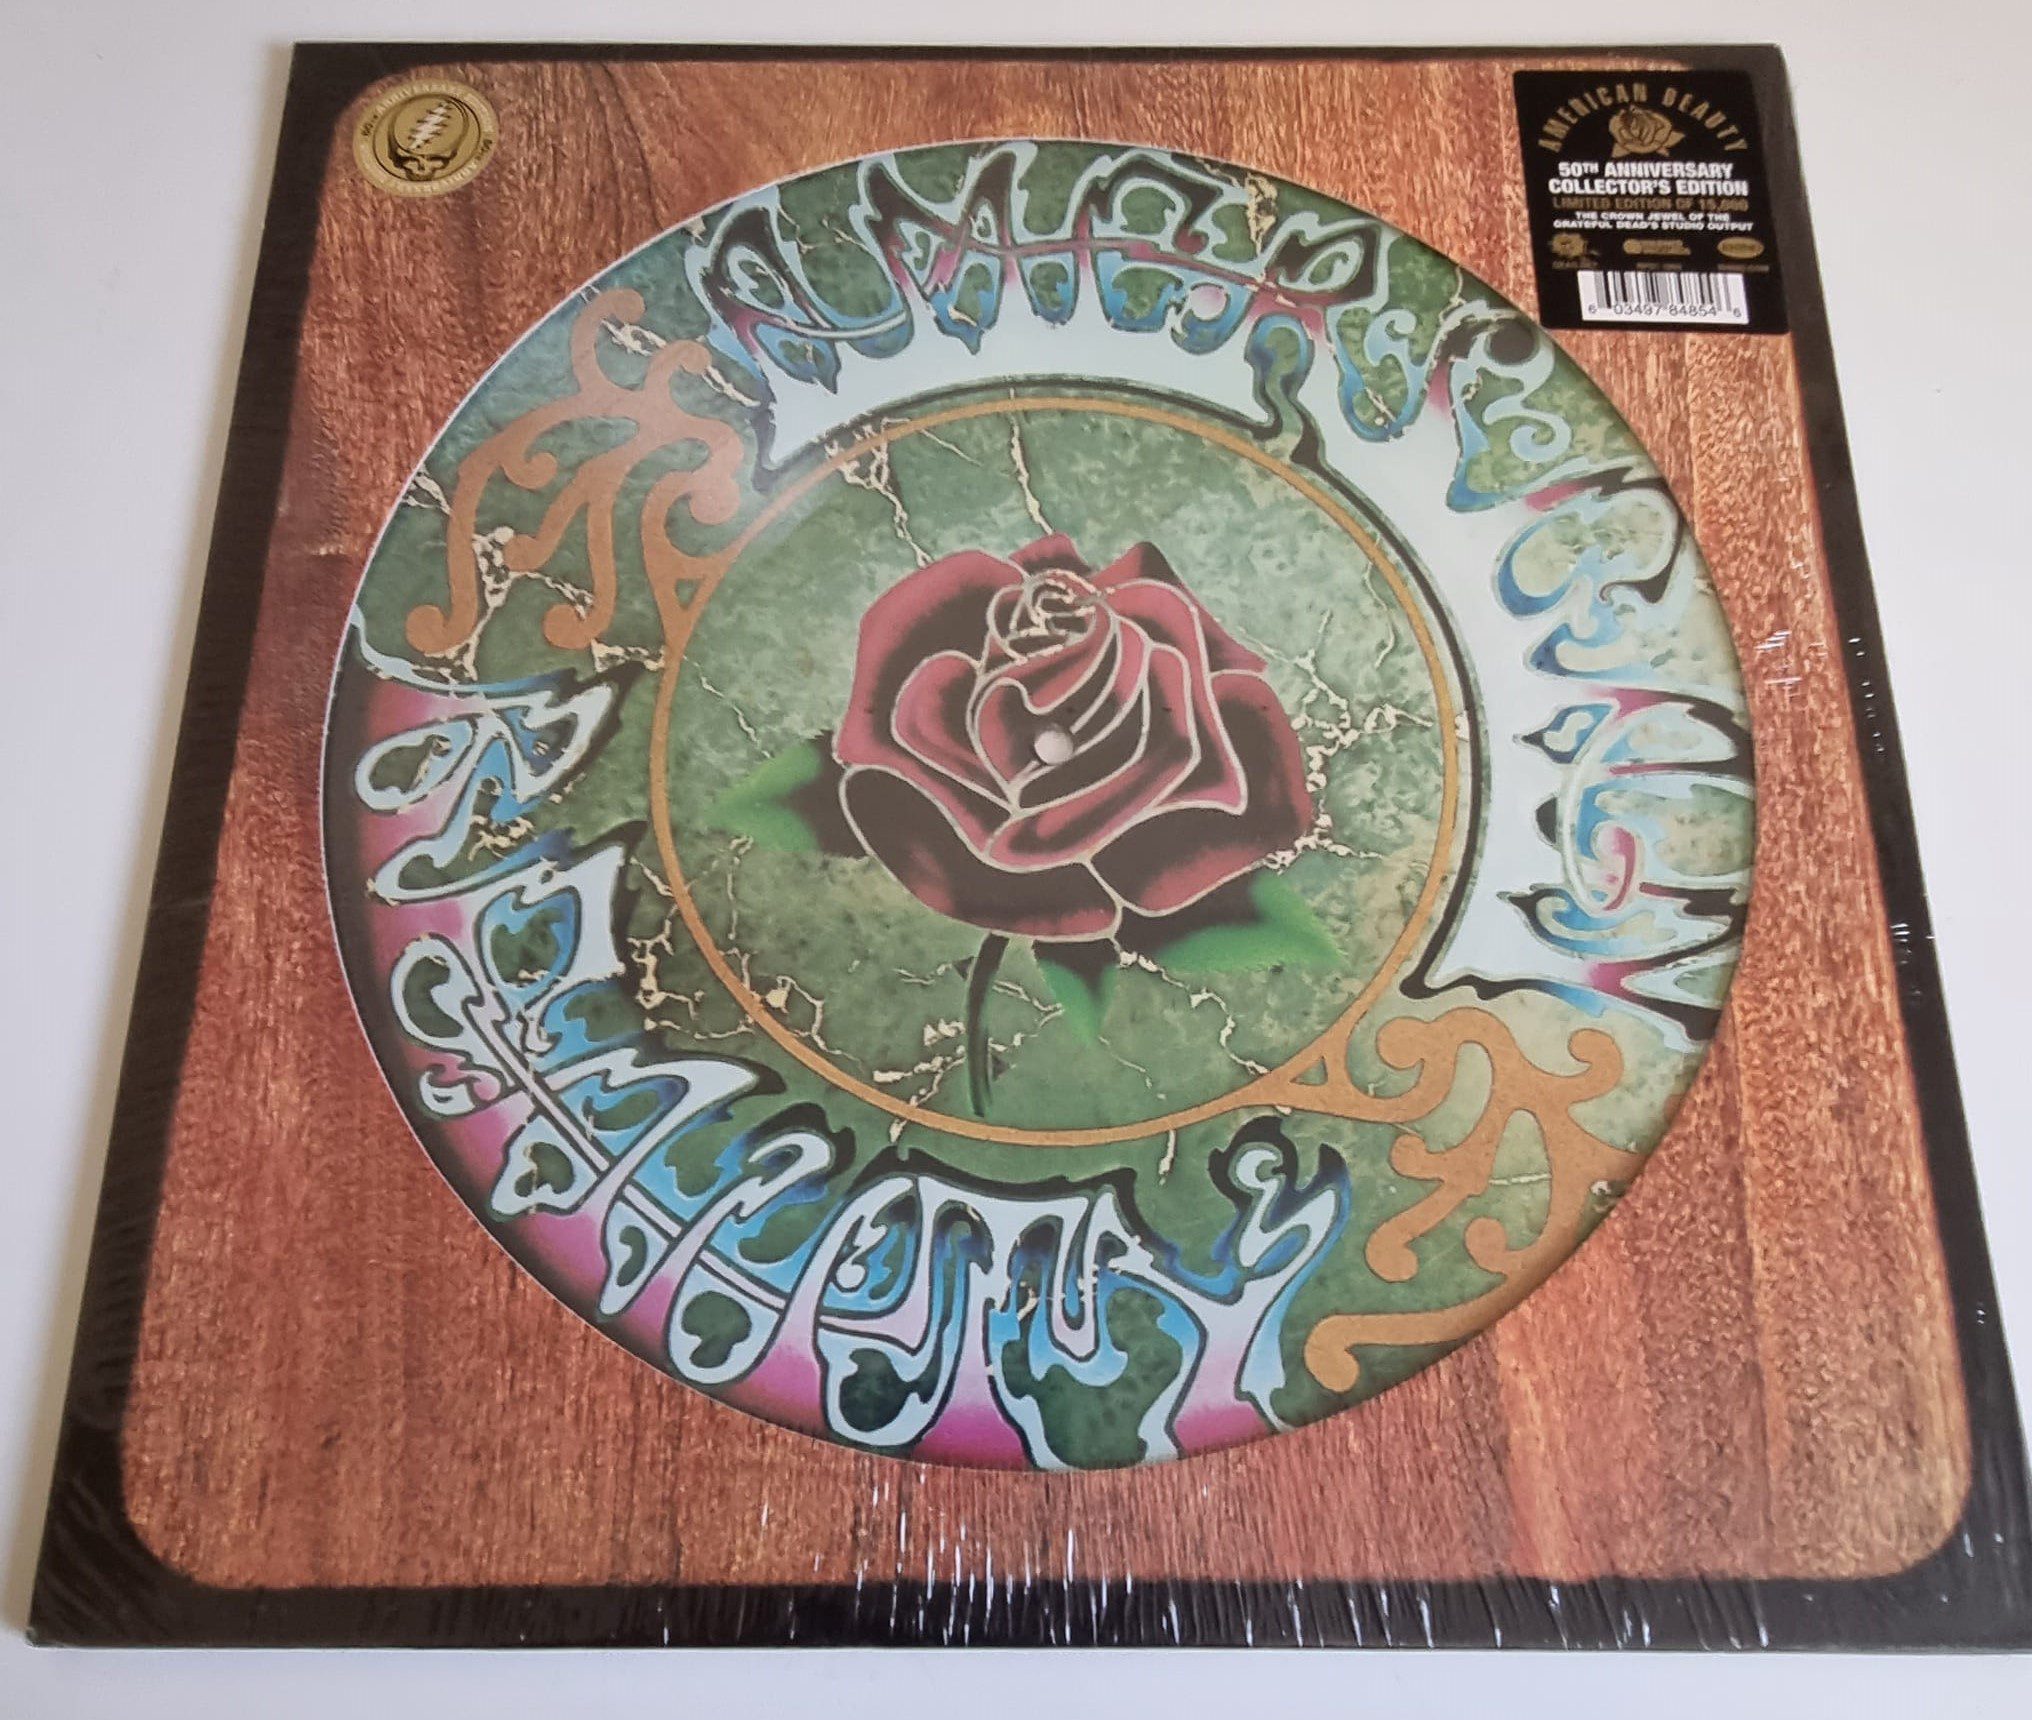 Buy this rare Grateful Dead record by clicking here